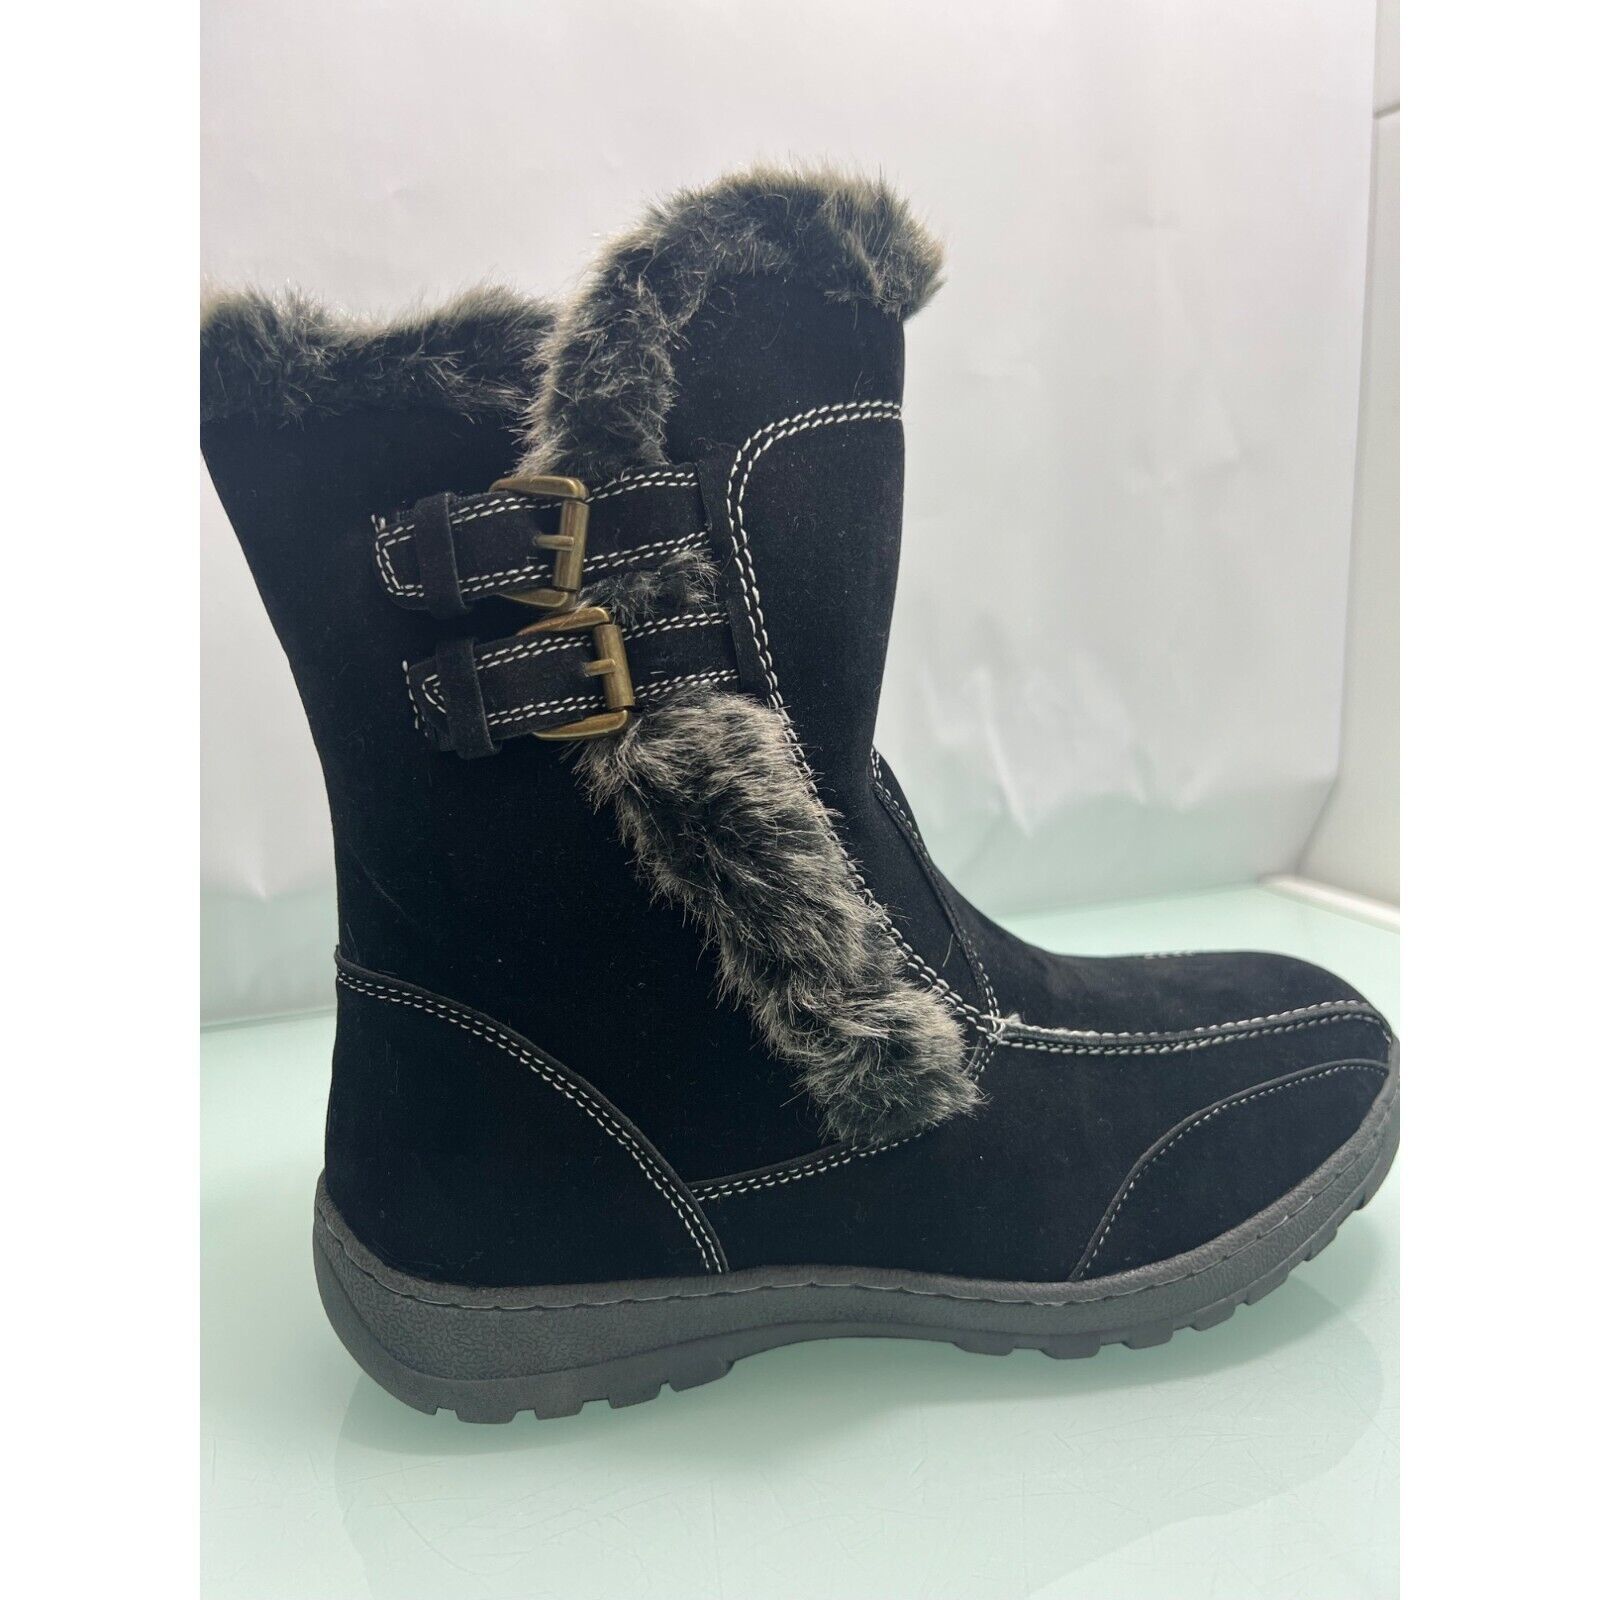 Primary image for Journee Collection Women's Winter Boots Sherpa Lined Black Faux Suede Size 8